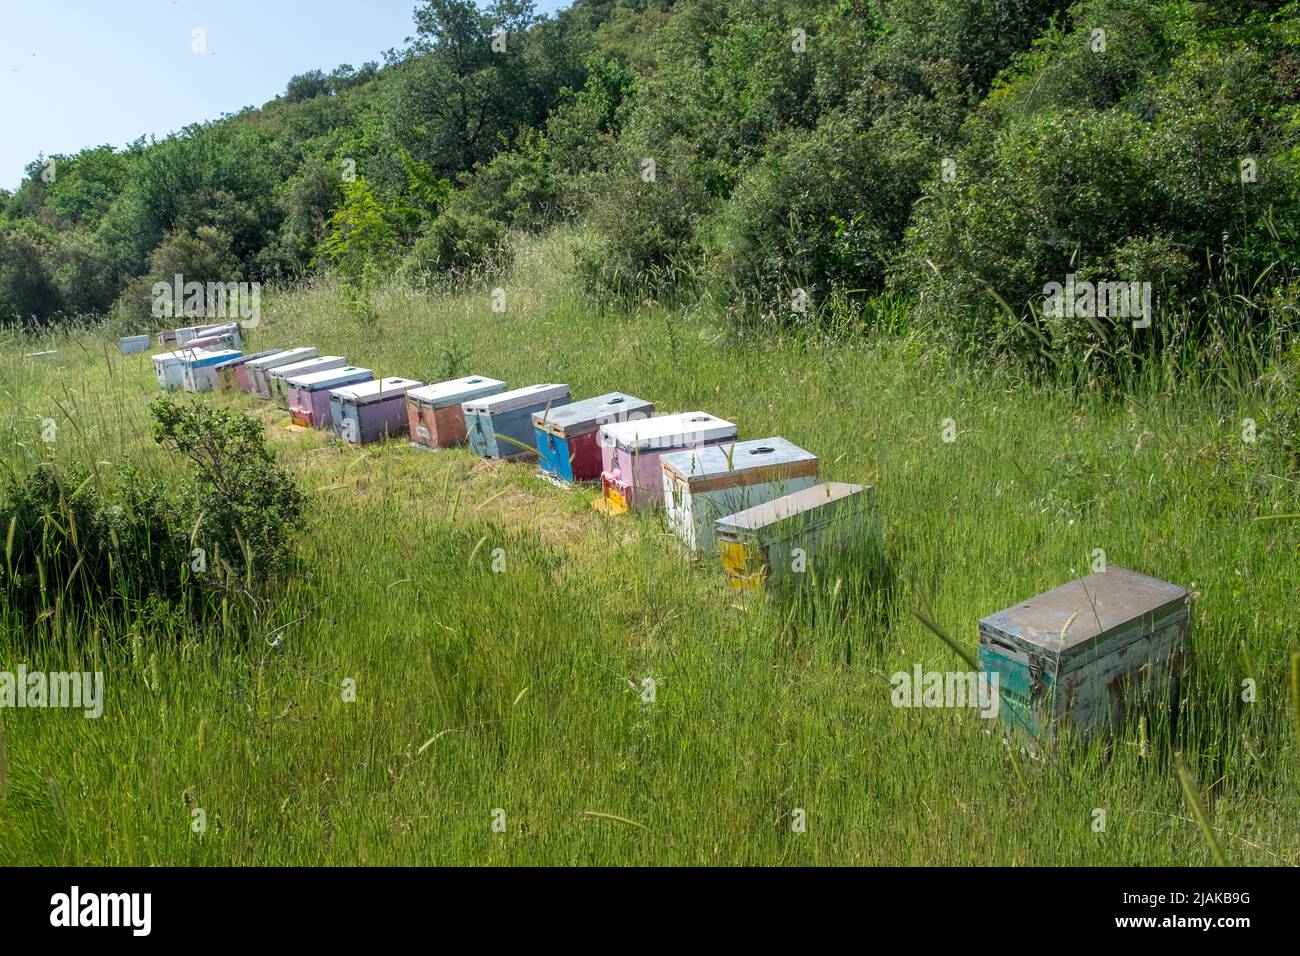 Bee hives in a field on the side of a hill Stock Photo